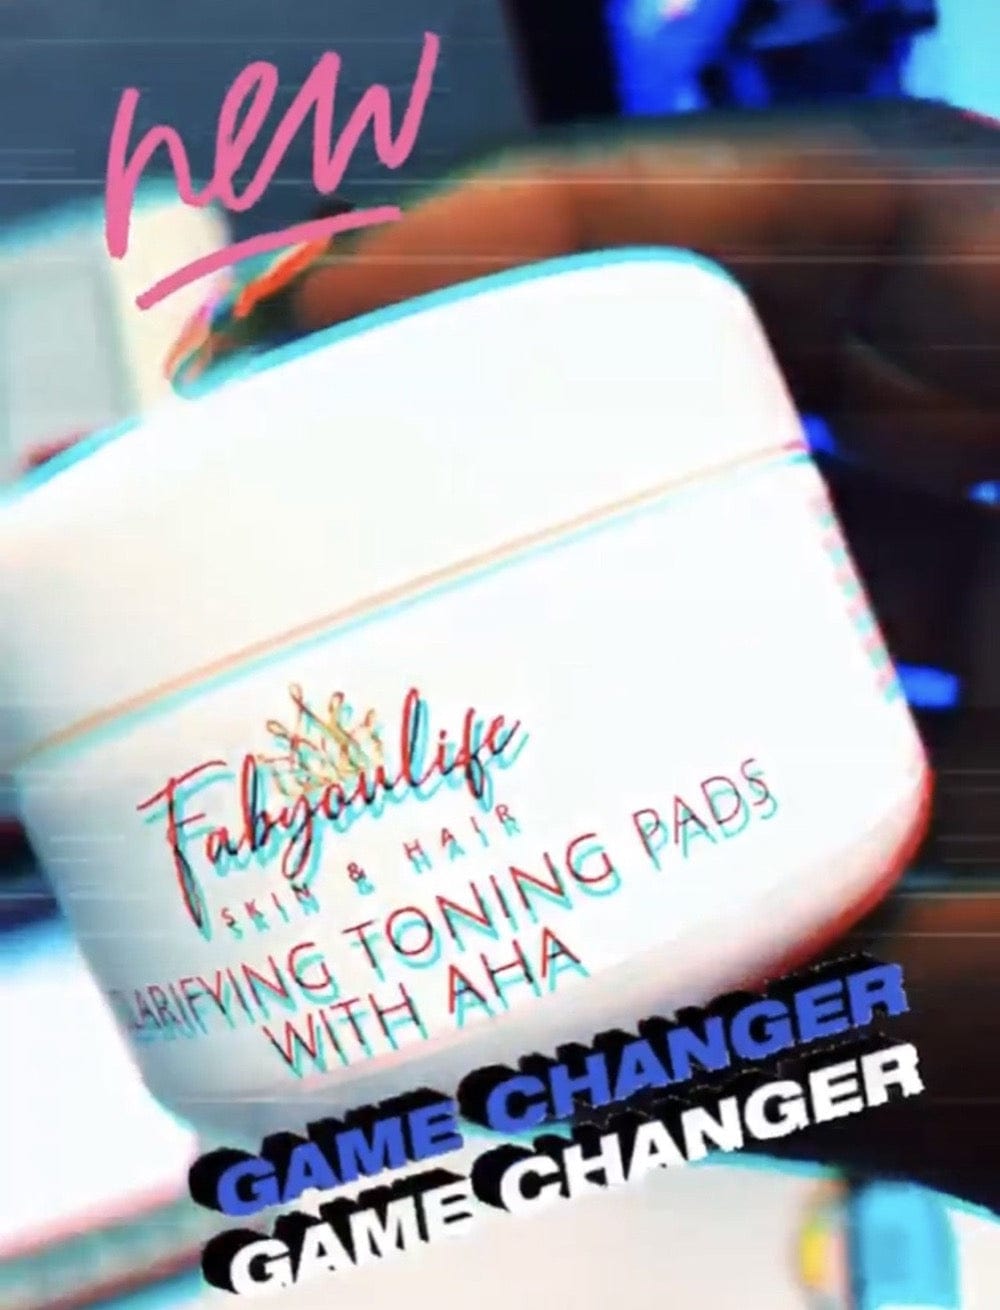 Clarifying Toning Pads with AHA - FabYouLife